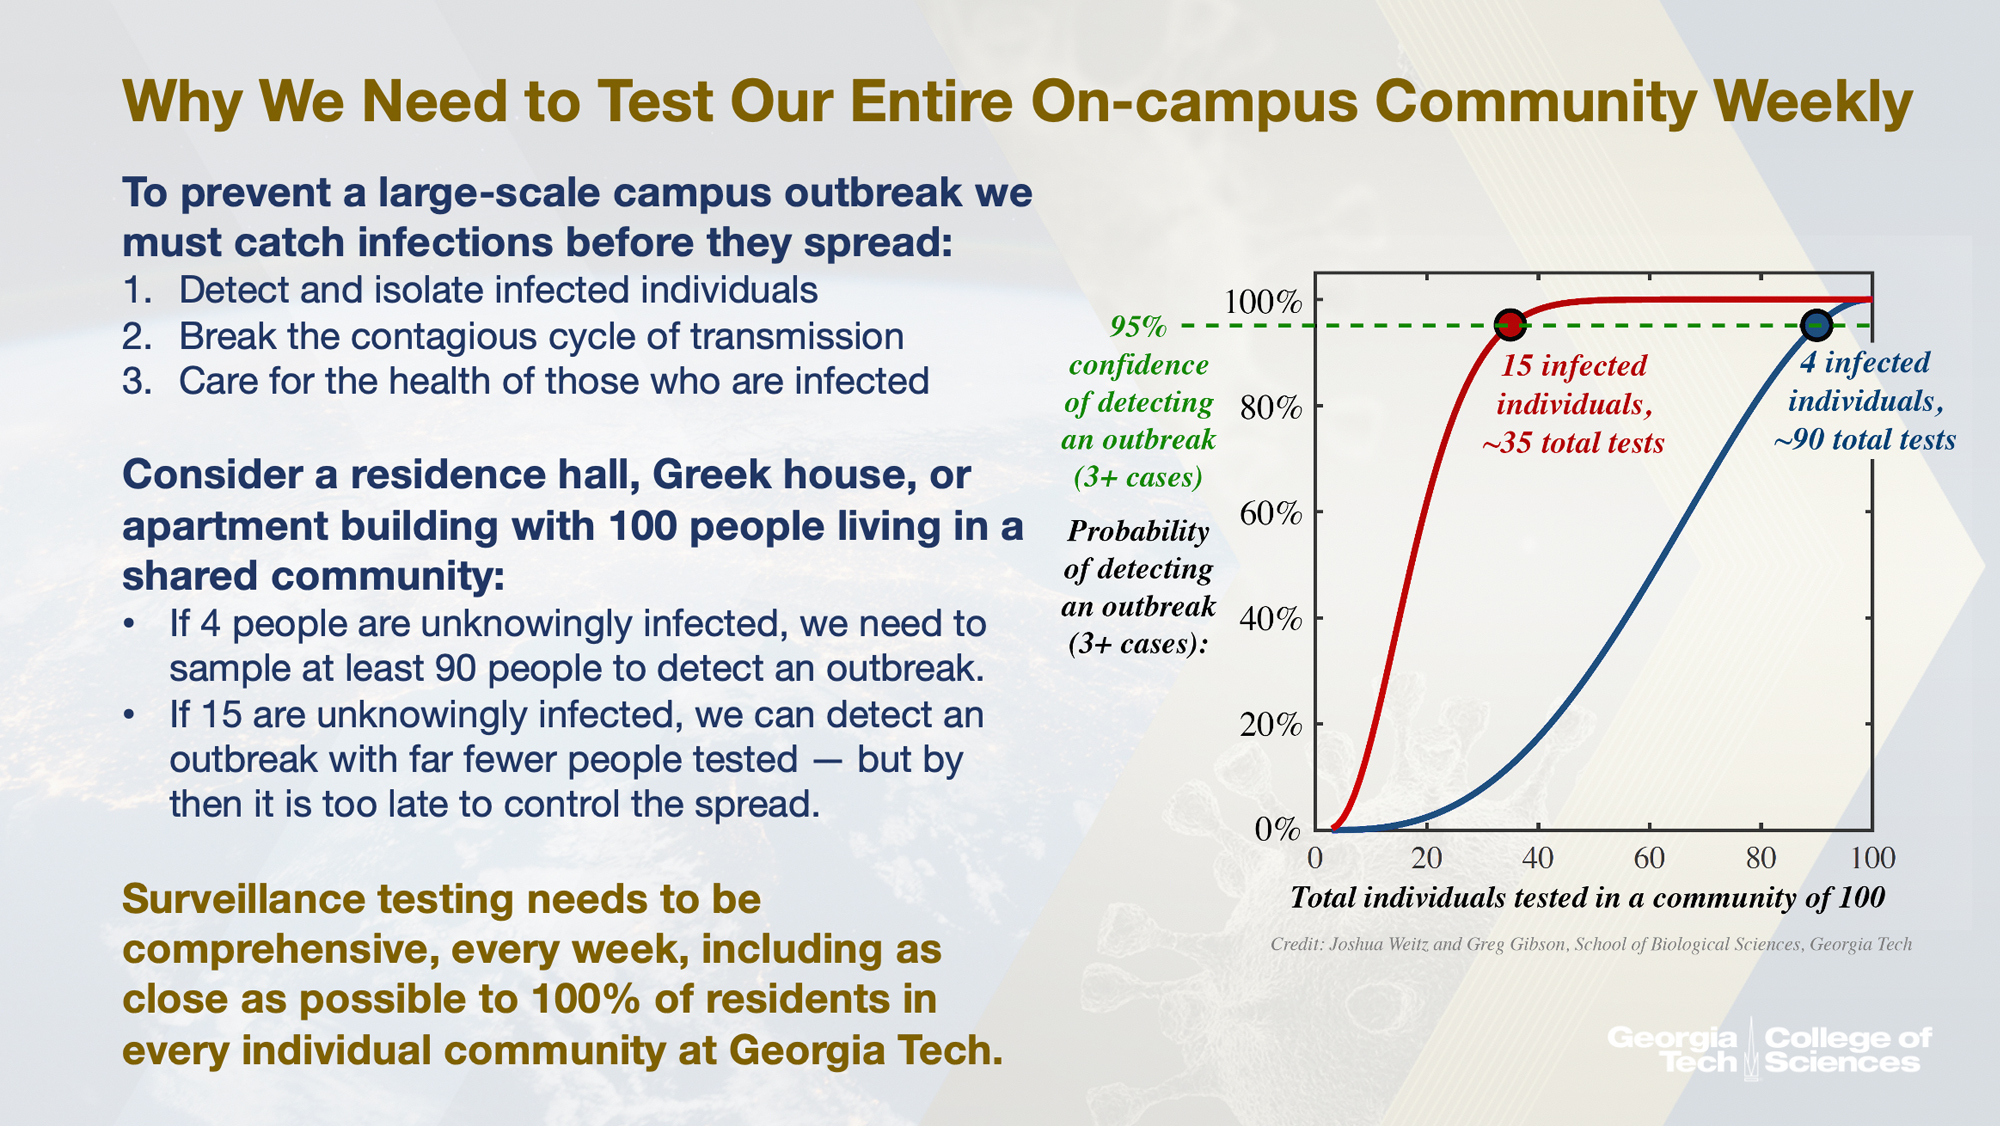 Why We Need to Test Our Entire On-campus Community Weekly